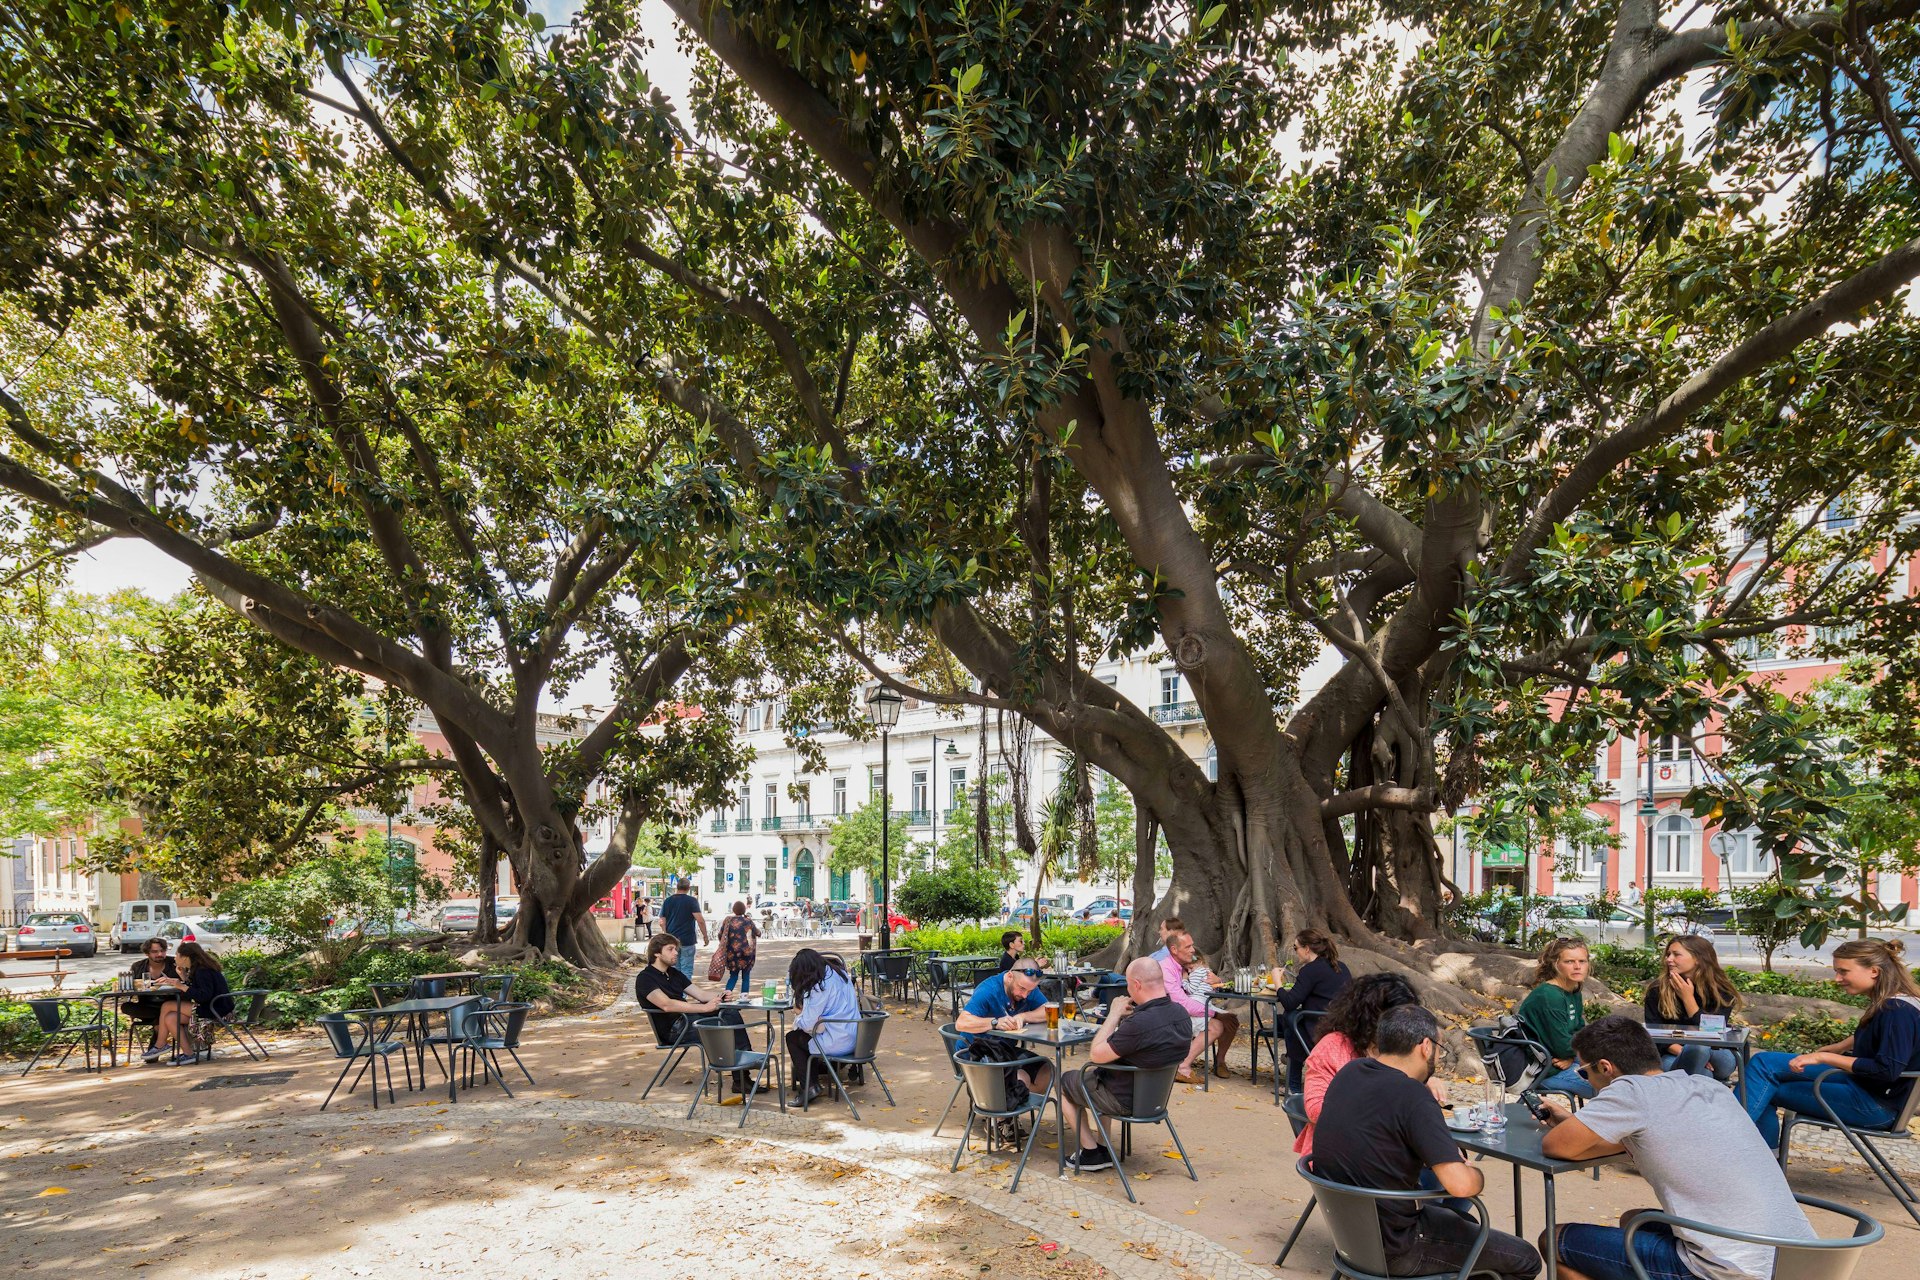 People sit at a few tables at an outside cafe underneath huge trees which form a canopy over them